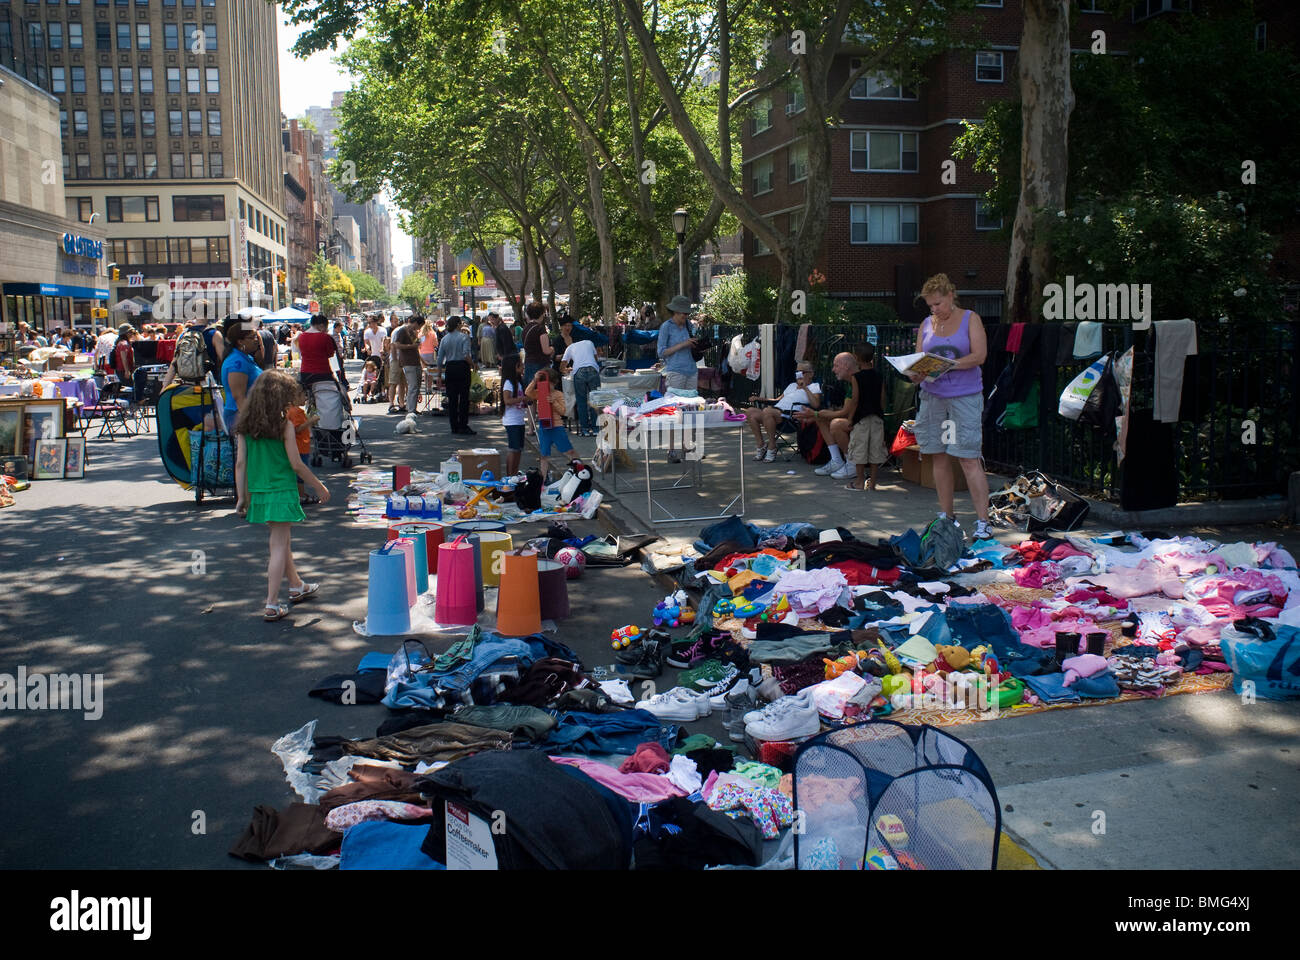 Shoppers search for bargains at a flea market in the New York neighborhood of Chelsea Stock Photo